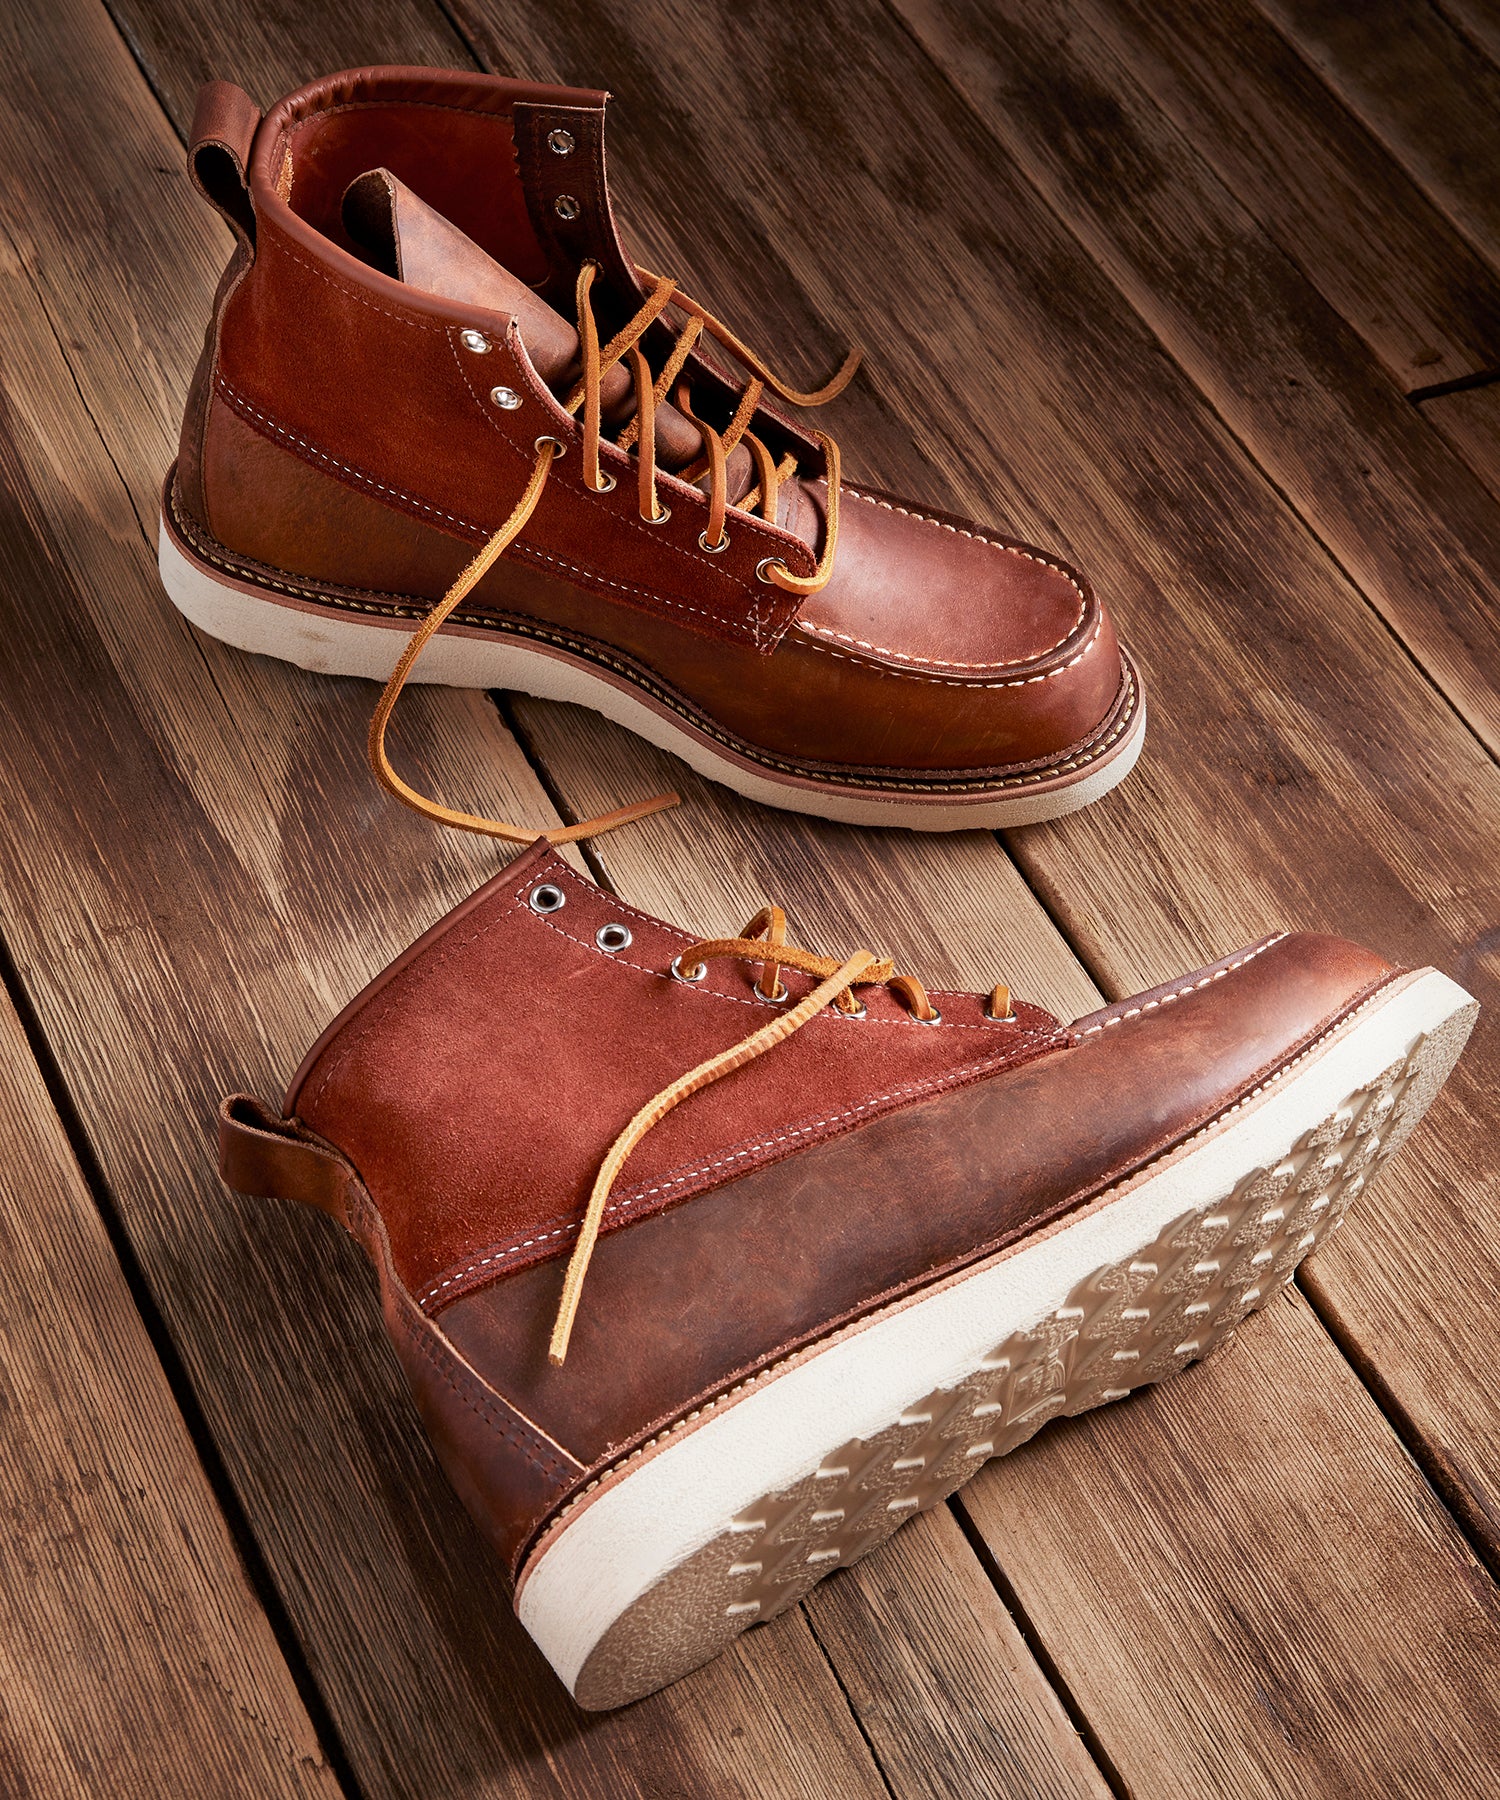 red wing moc toe safety toe